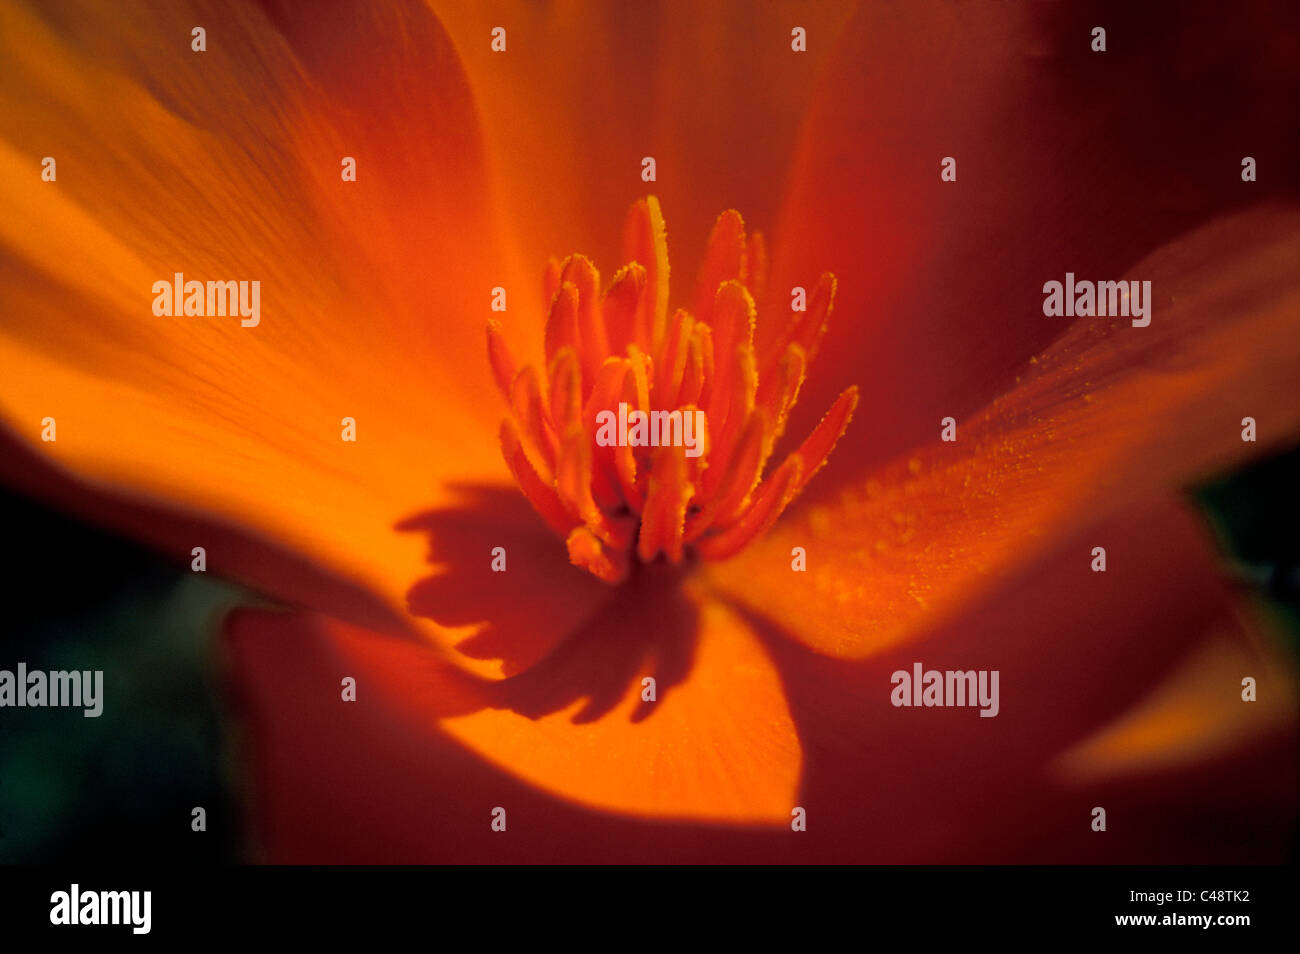 The stamen and pollen grains are seen inside the petals of a brilliant orange California poppy, the official state flower of California since 1903. Stock Photo